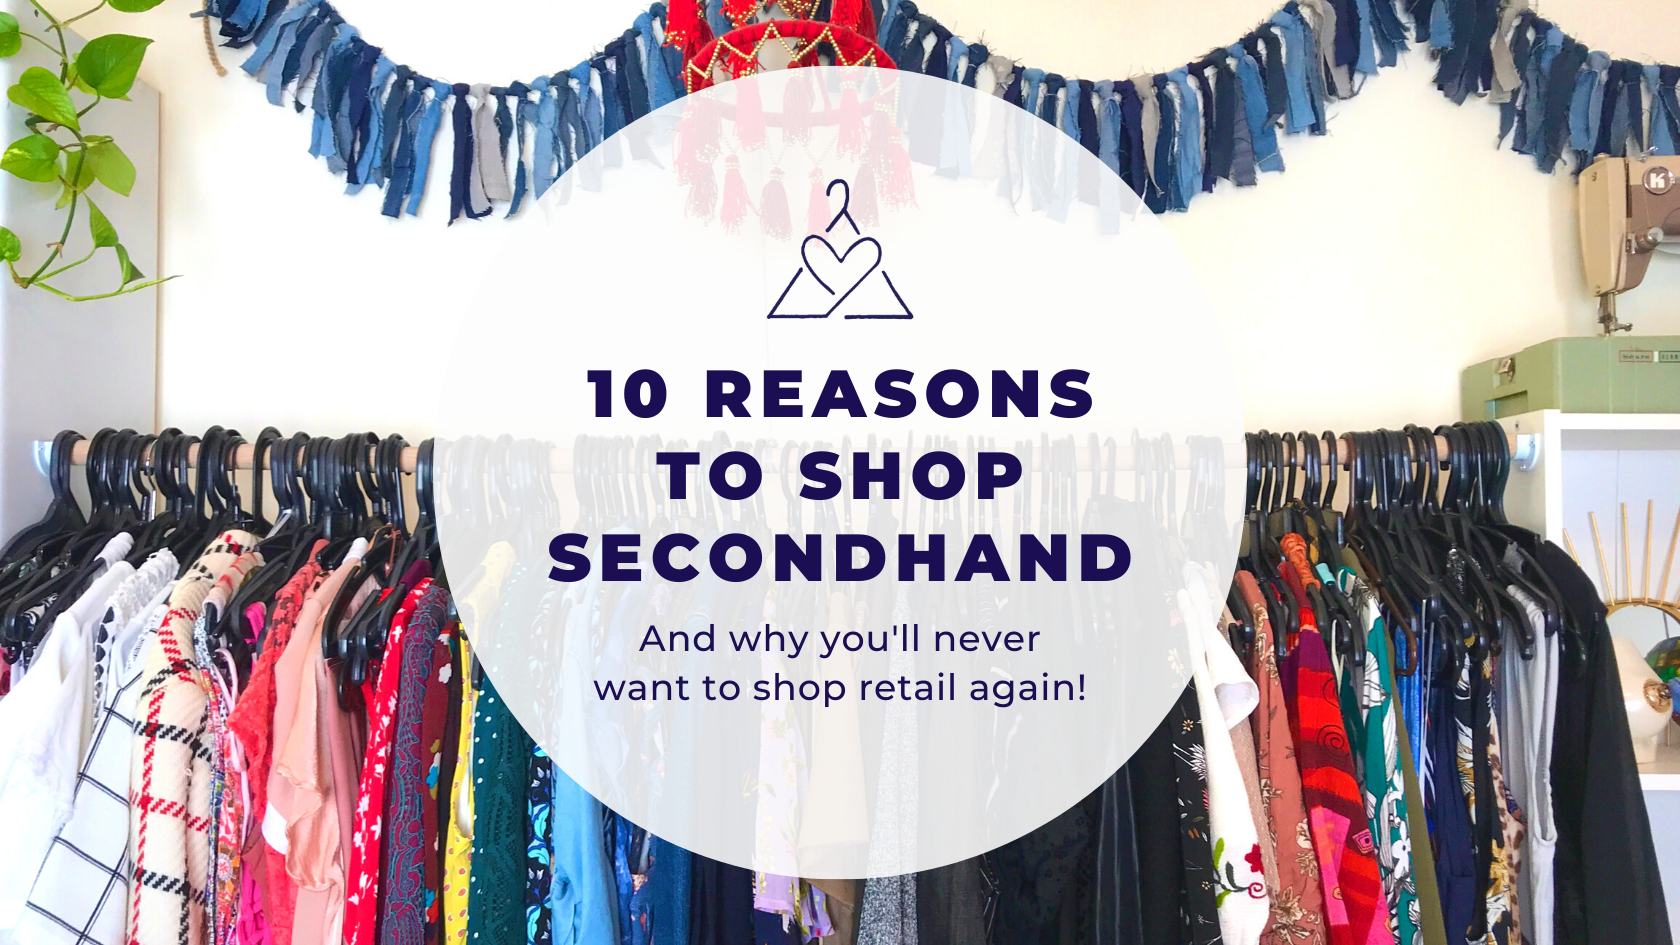 10 Reasons to Shop Secondhand – Dressed by Danielle